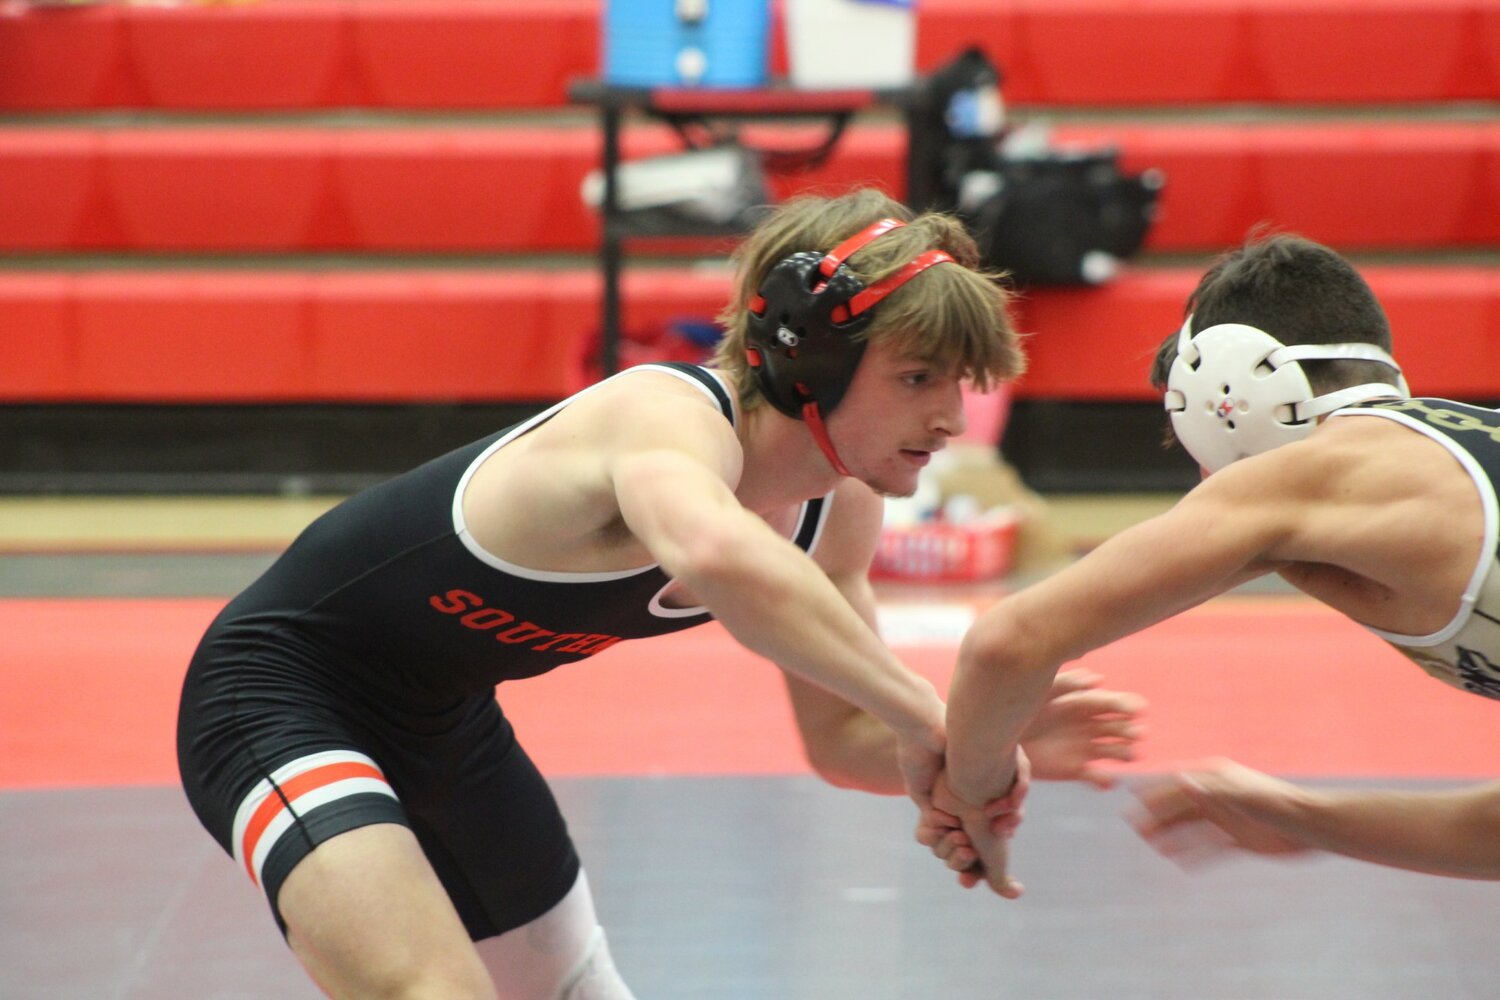 Maddox Cade continued his dominant season at 138. Cade is one of the top ranked wrestlers at 138 pounds in the New Castle Semi-State rankings.